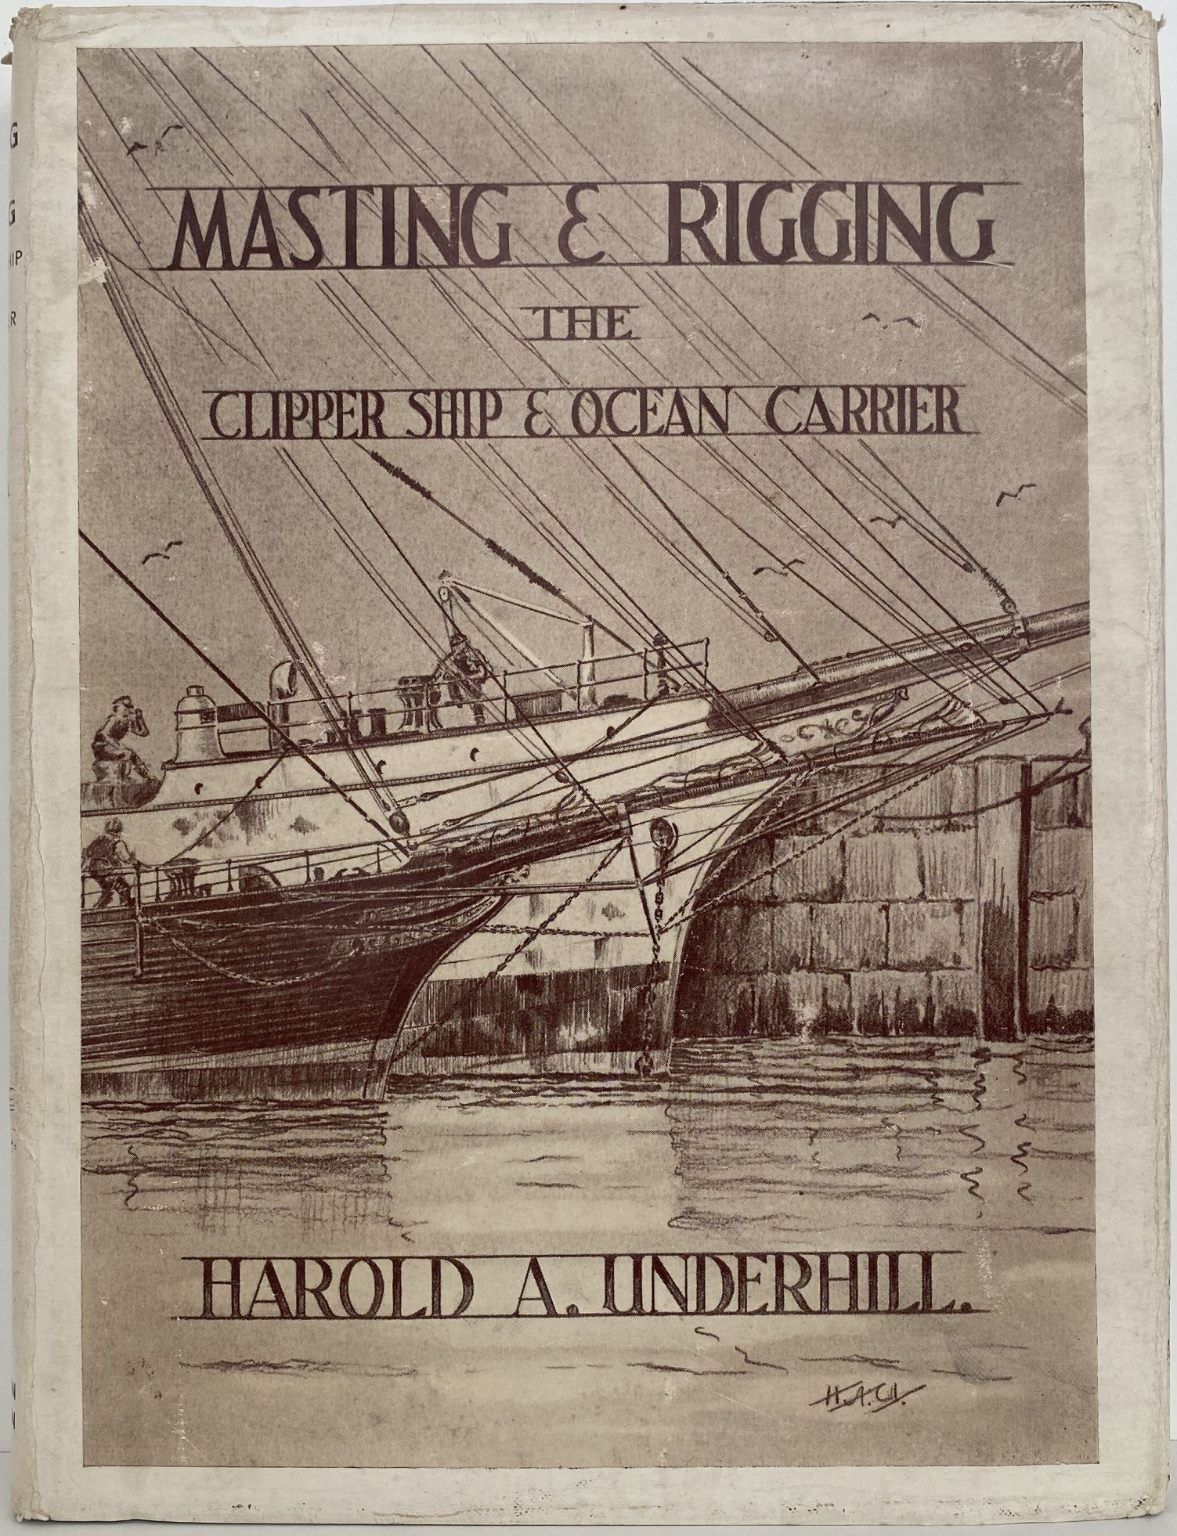 MASTING & RIGGING the Clipper Ship and Ocean Carrier